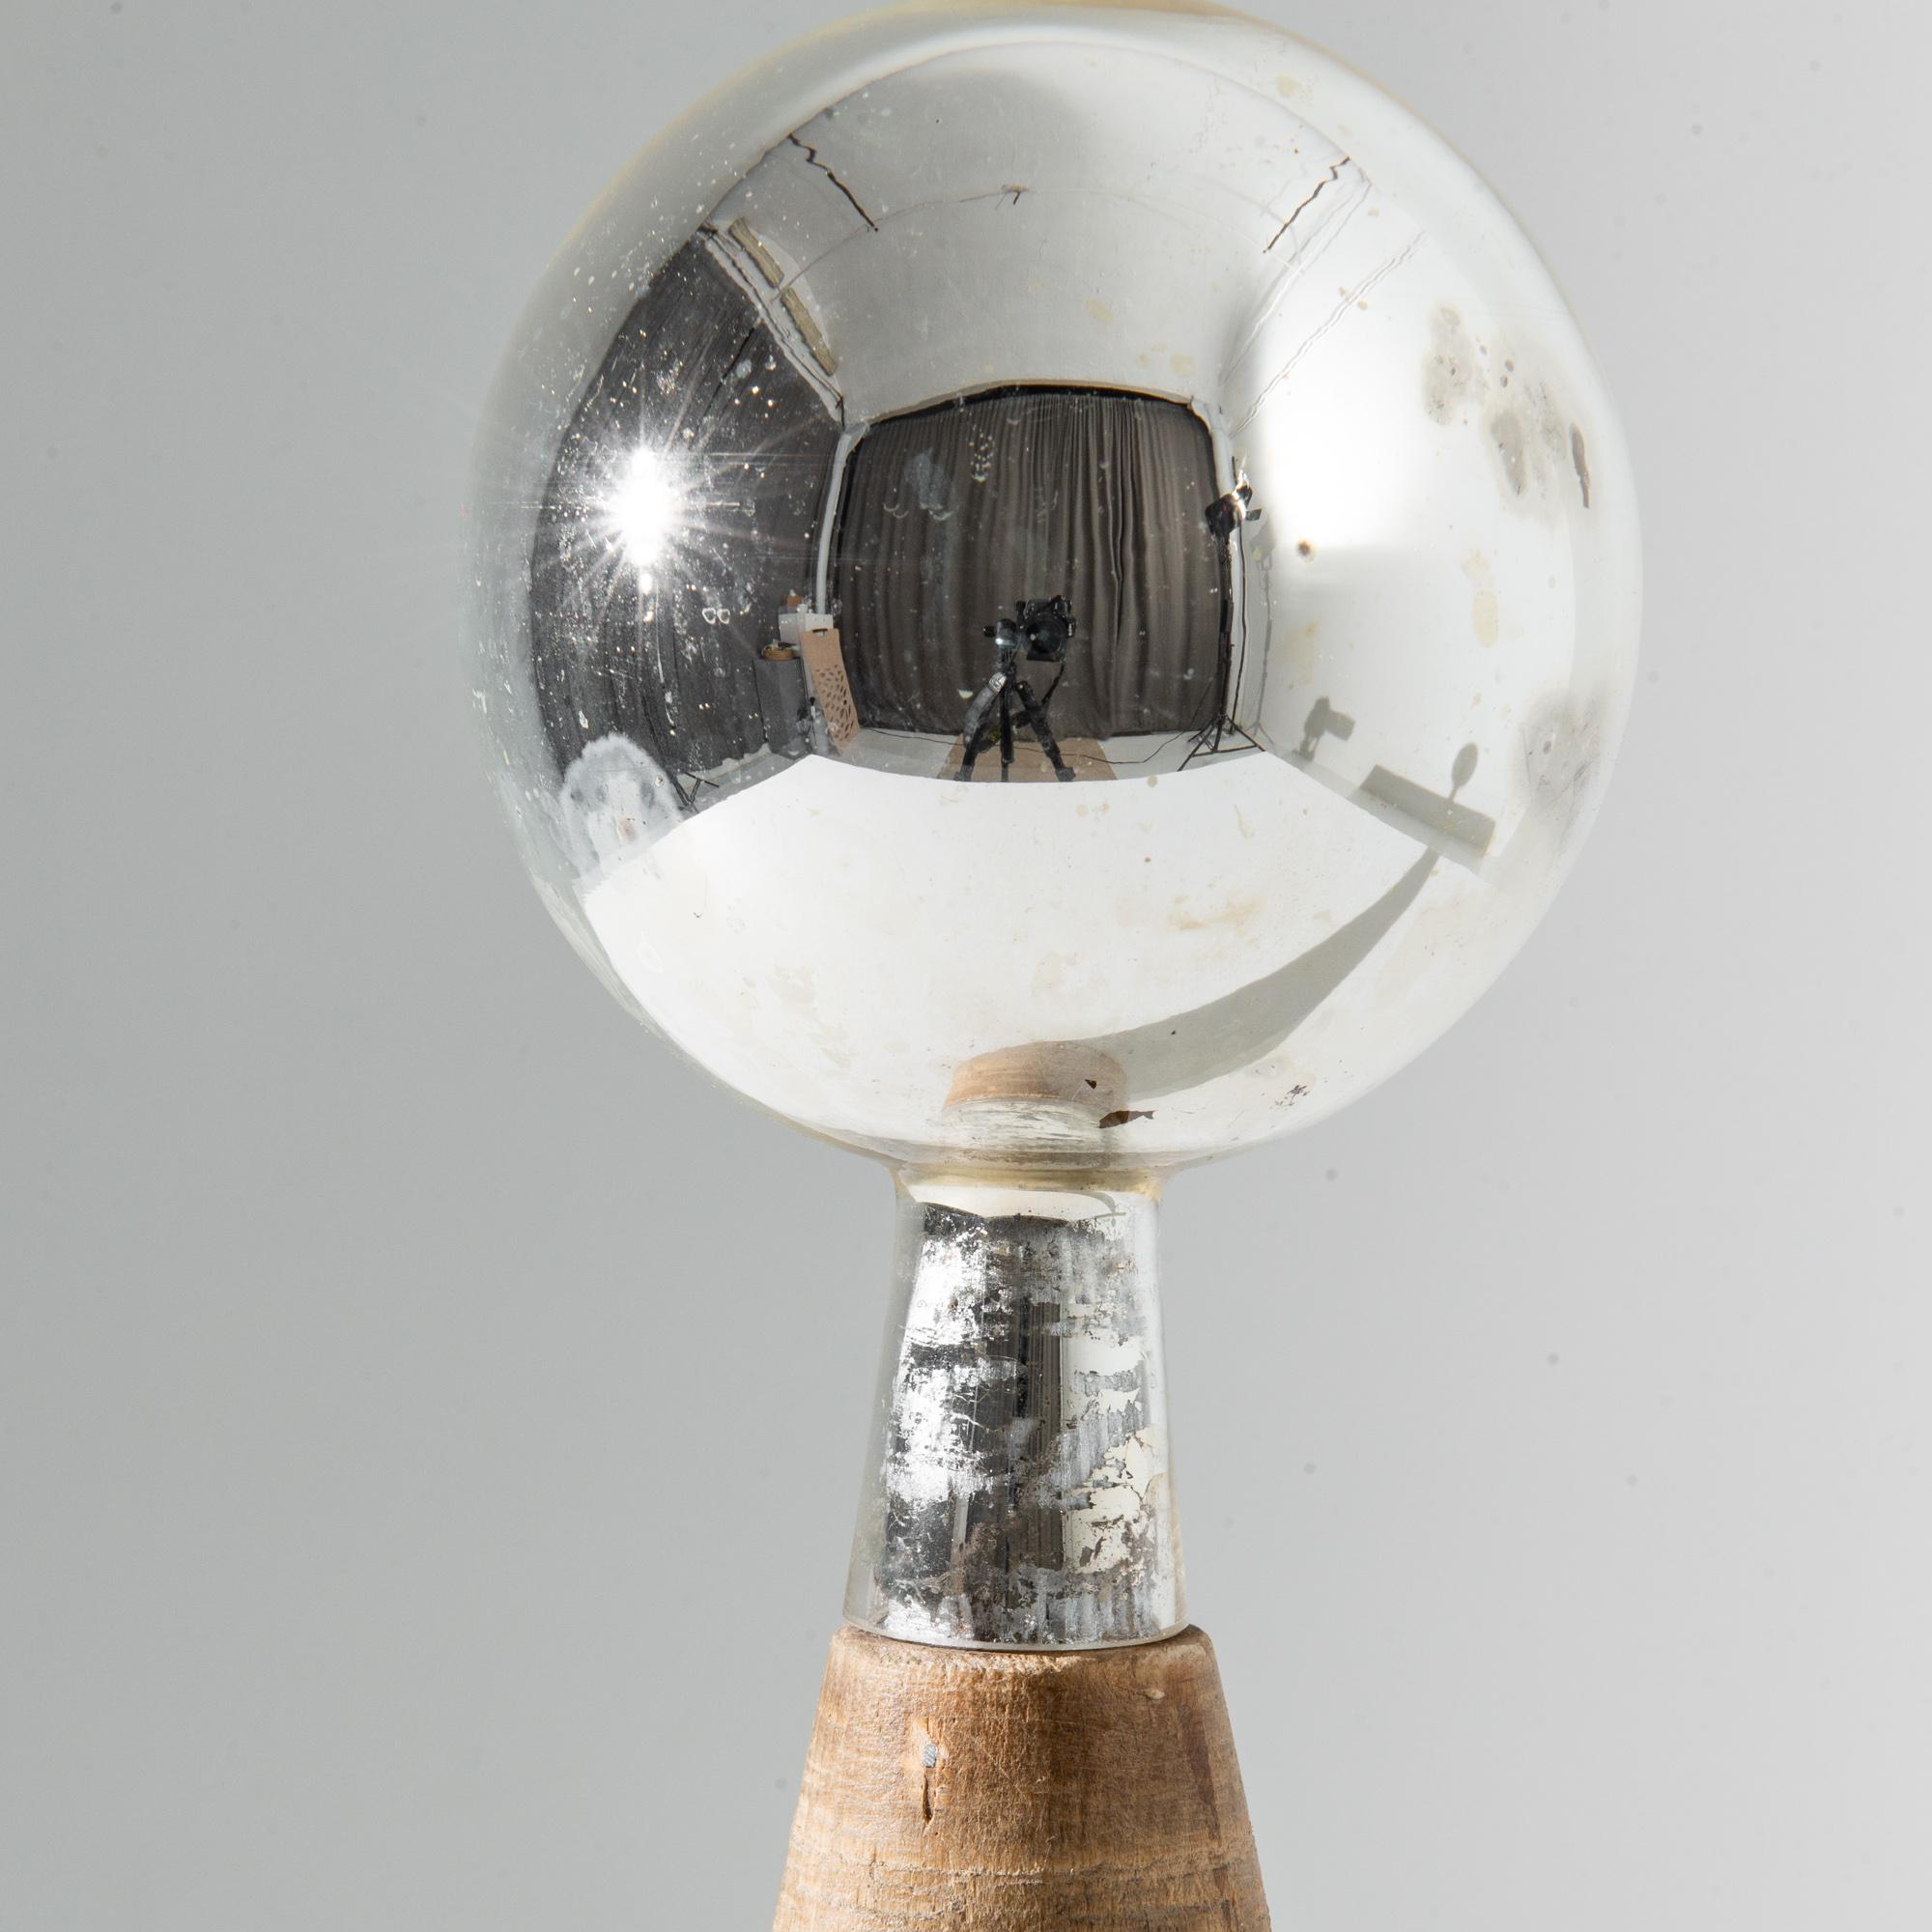 20th Century Vintage French Mirrored Sphere on Wooden Stand